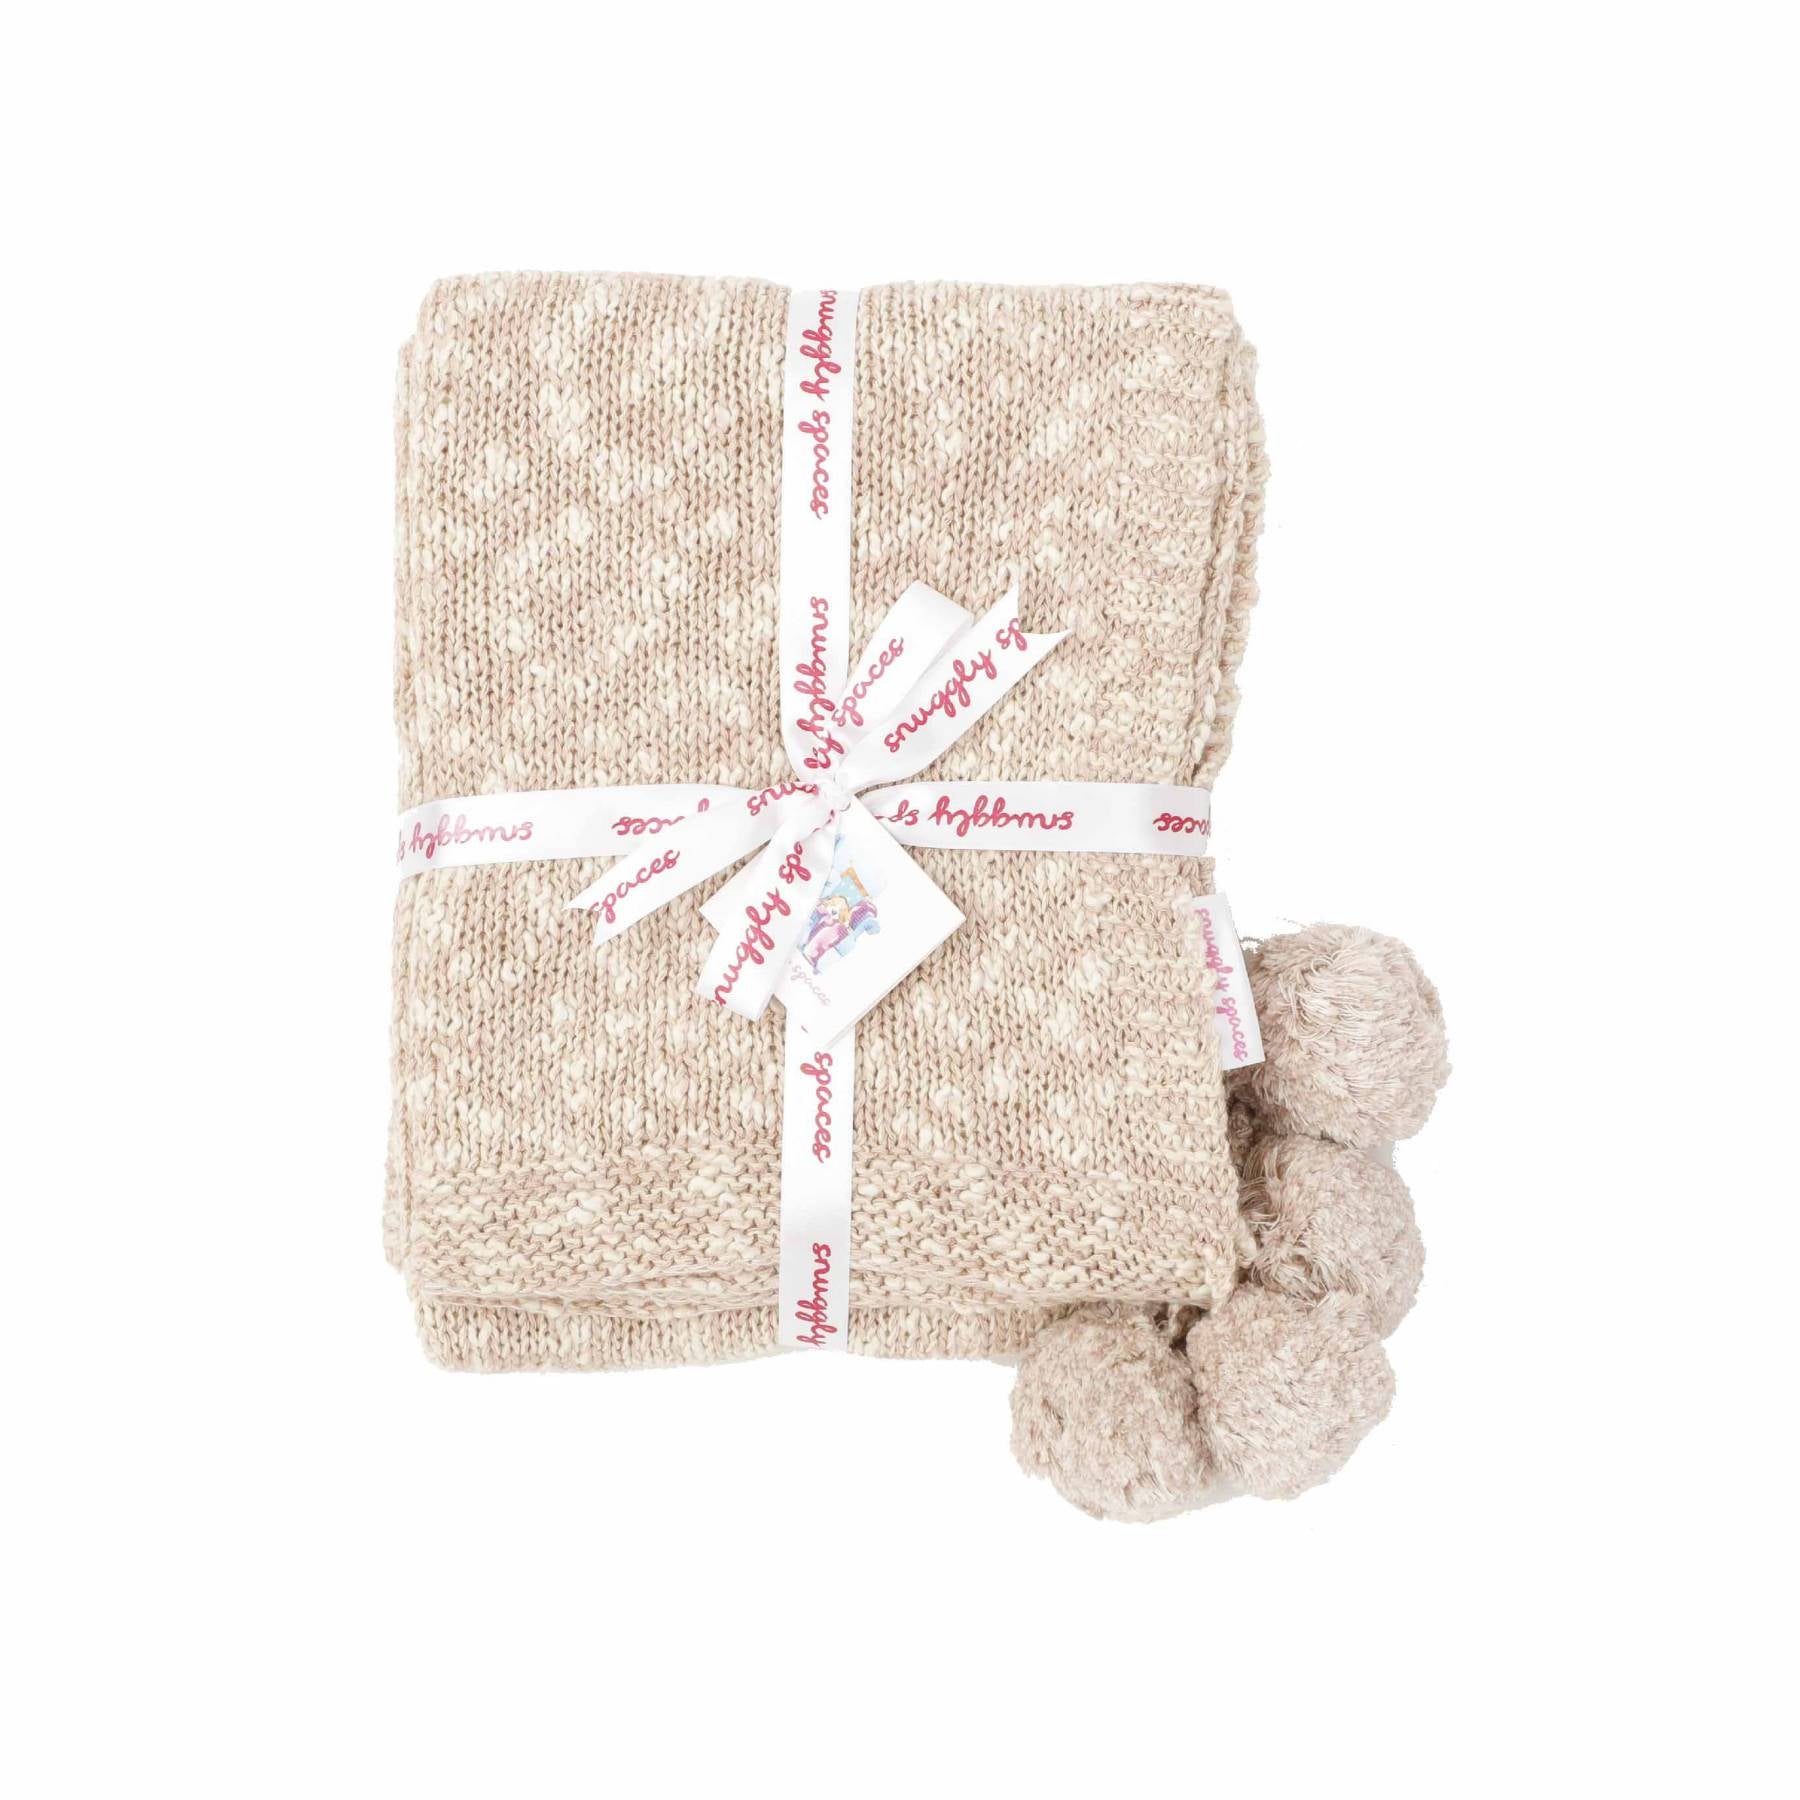 Snuggly Knitted Blanket - Blush Pink